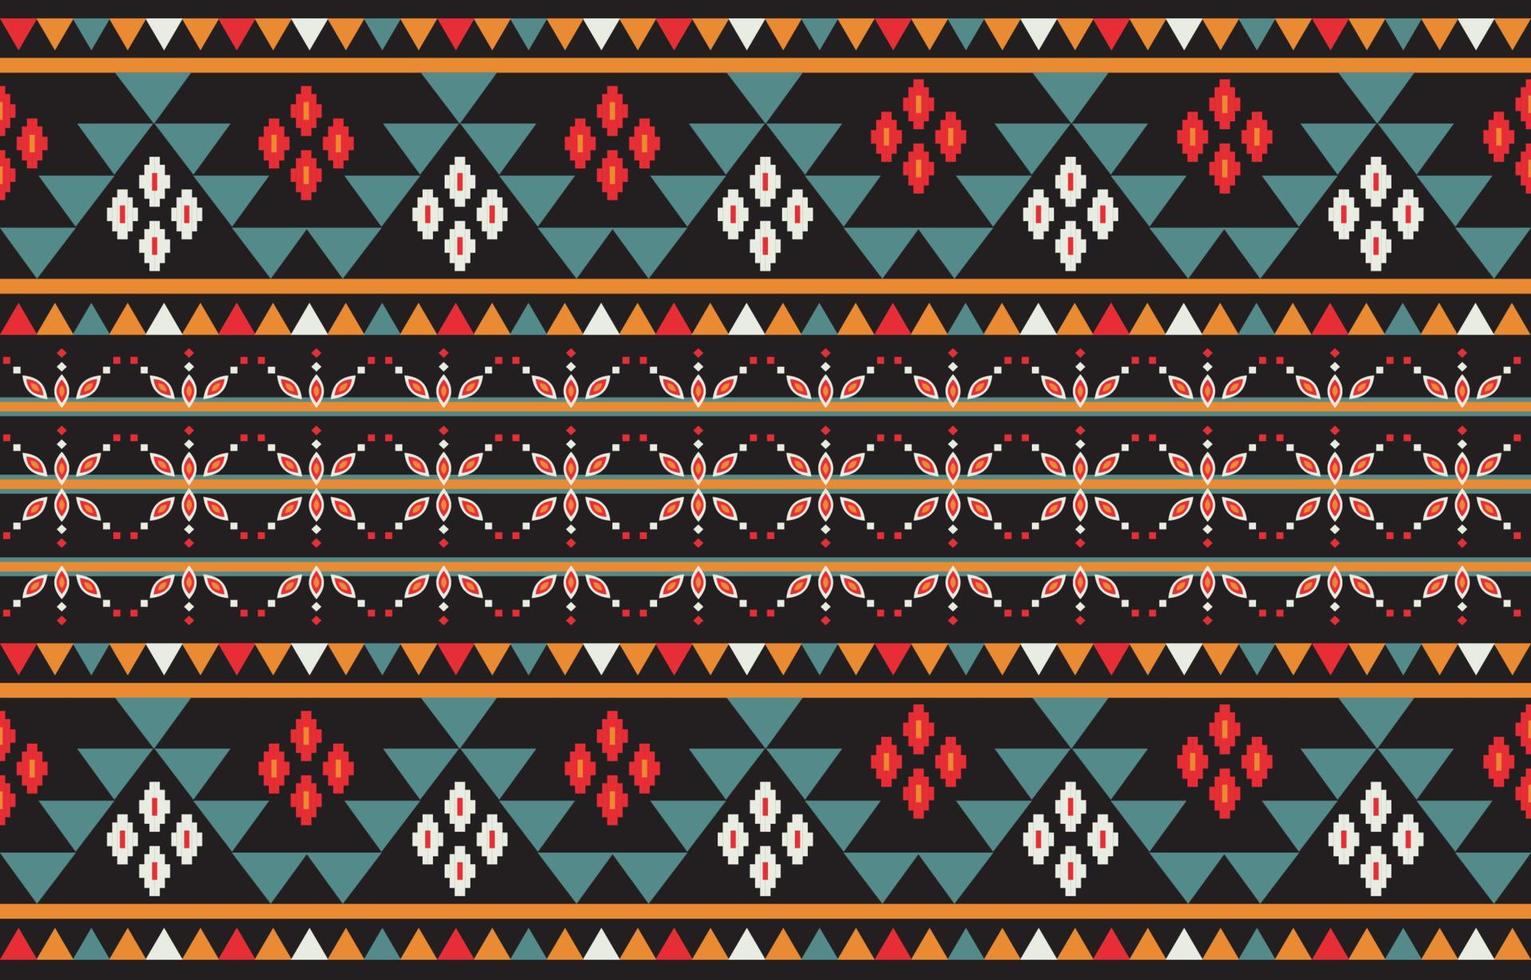 Beautiful Ethnic abstract geometric art. Seamless chevron pattern in tribal, folk embroidery, and floral. Aztec rhombus art ornament print.Design for carpet, wallpaper, clothing, wrapping, fabric. vector